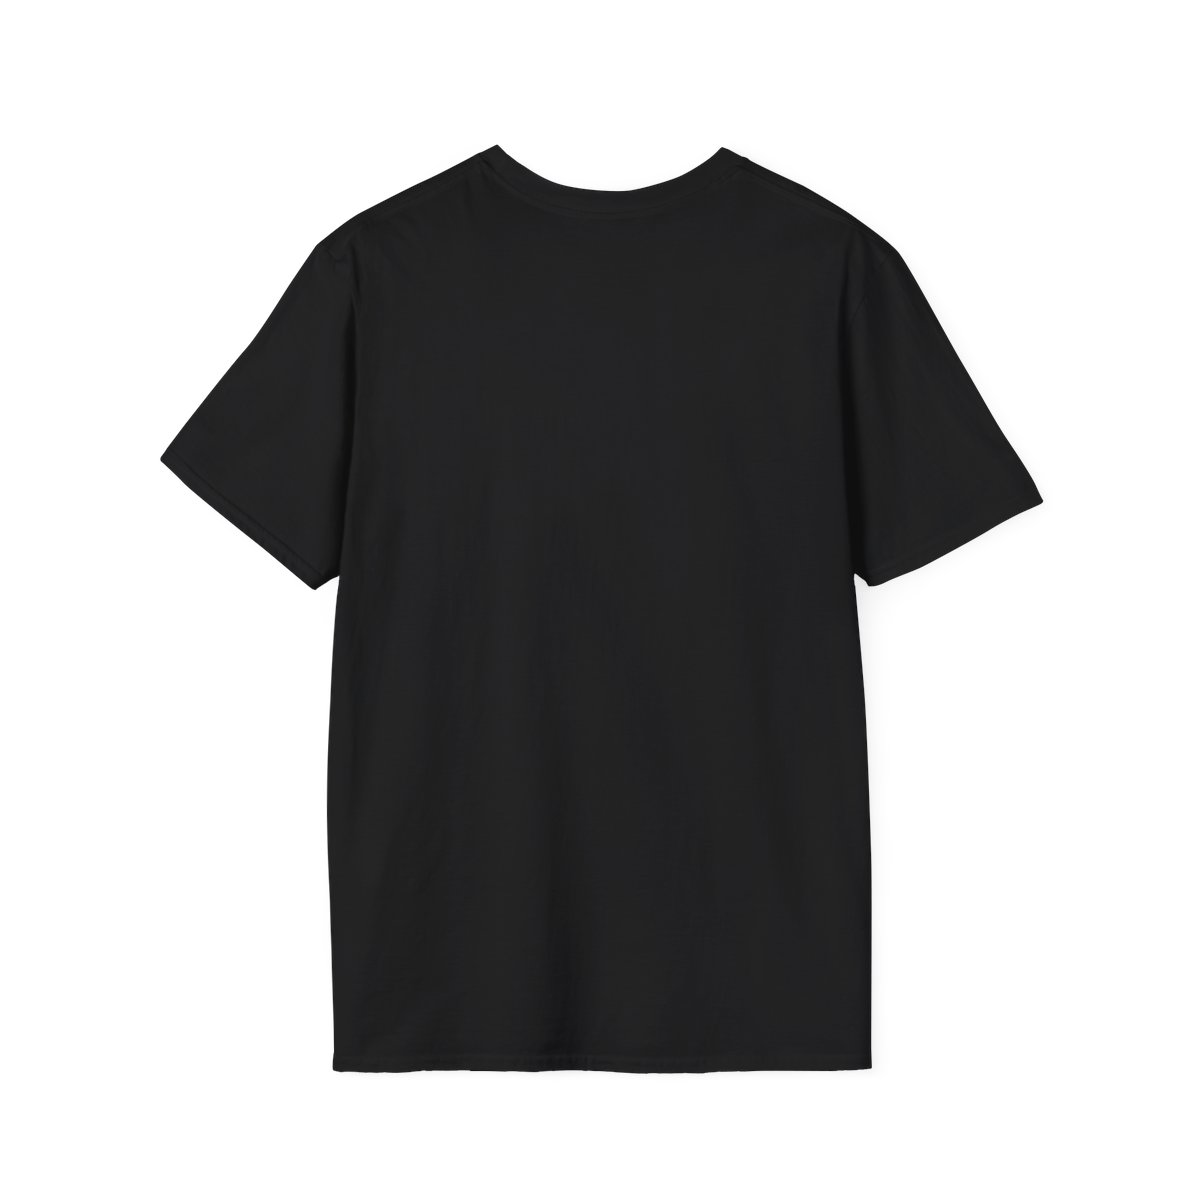 Stage Props Shirt, Don't Touch Props, Theatre Tech Gift, black only, cotton product thumbnail image